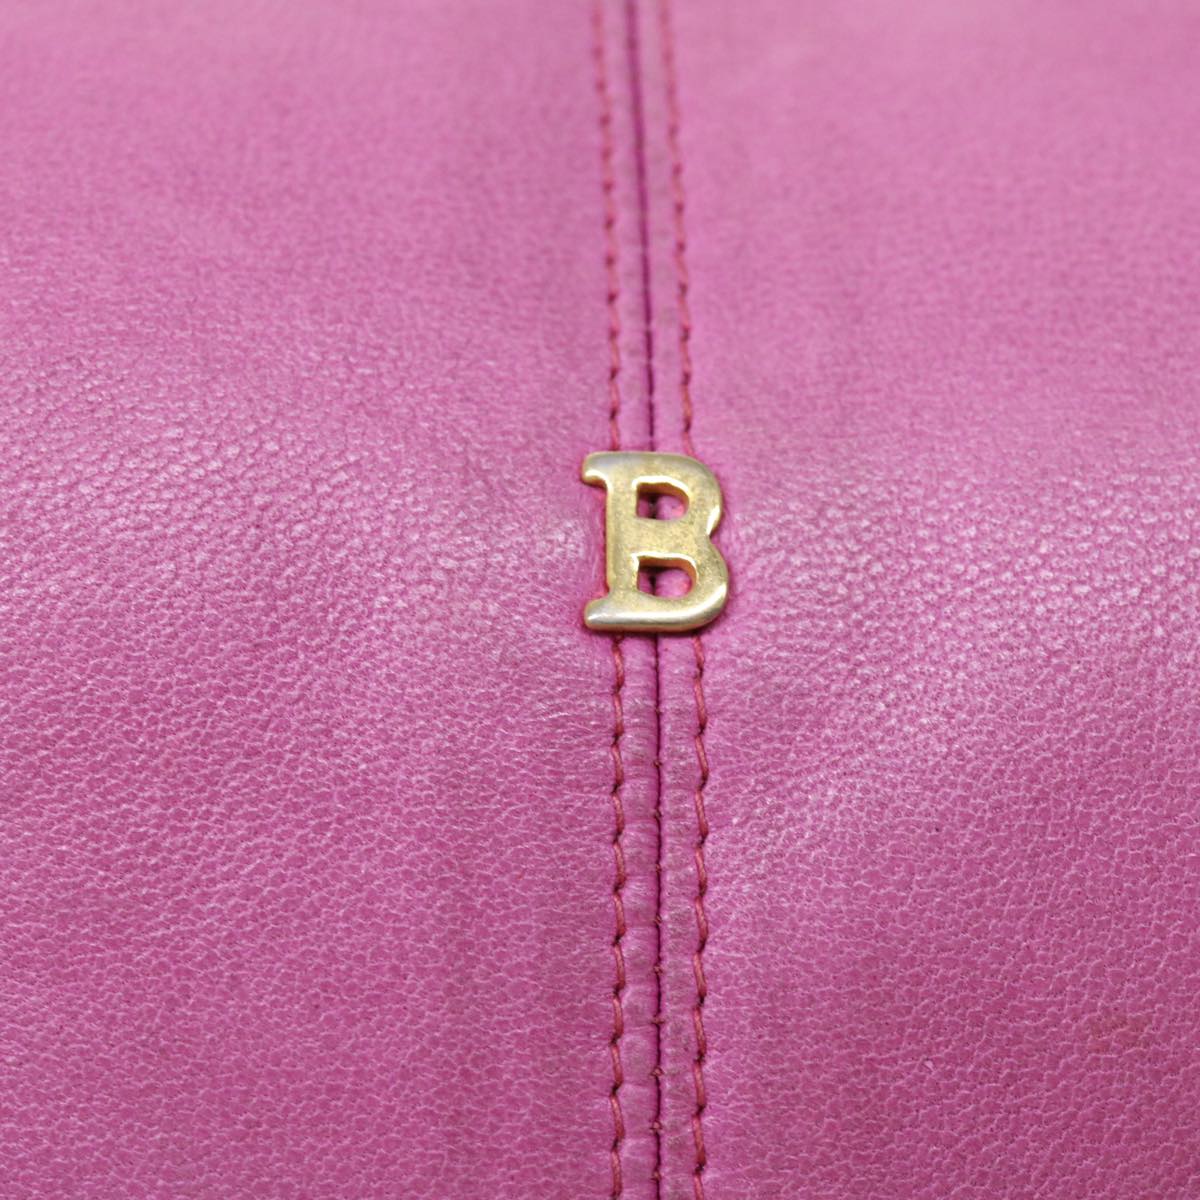 BALLY Shoulder Bag Leather Pink Auth yk8158